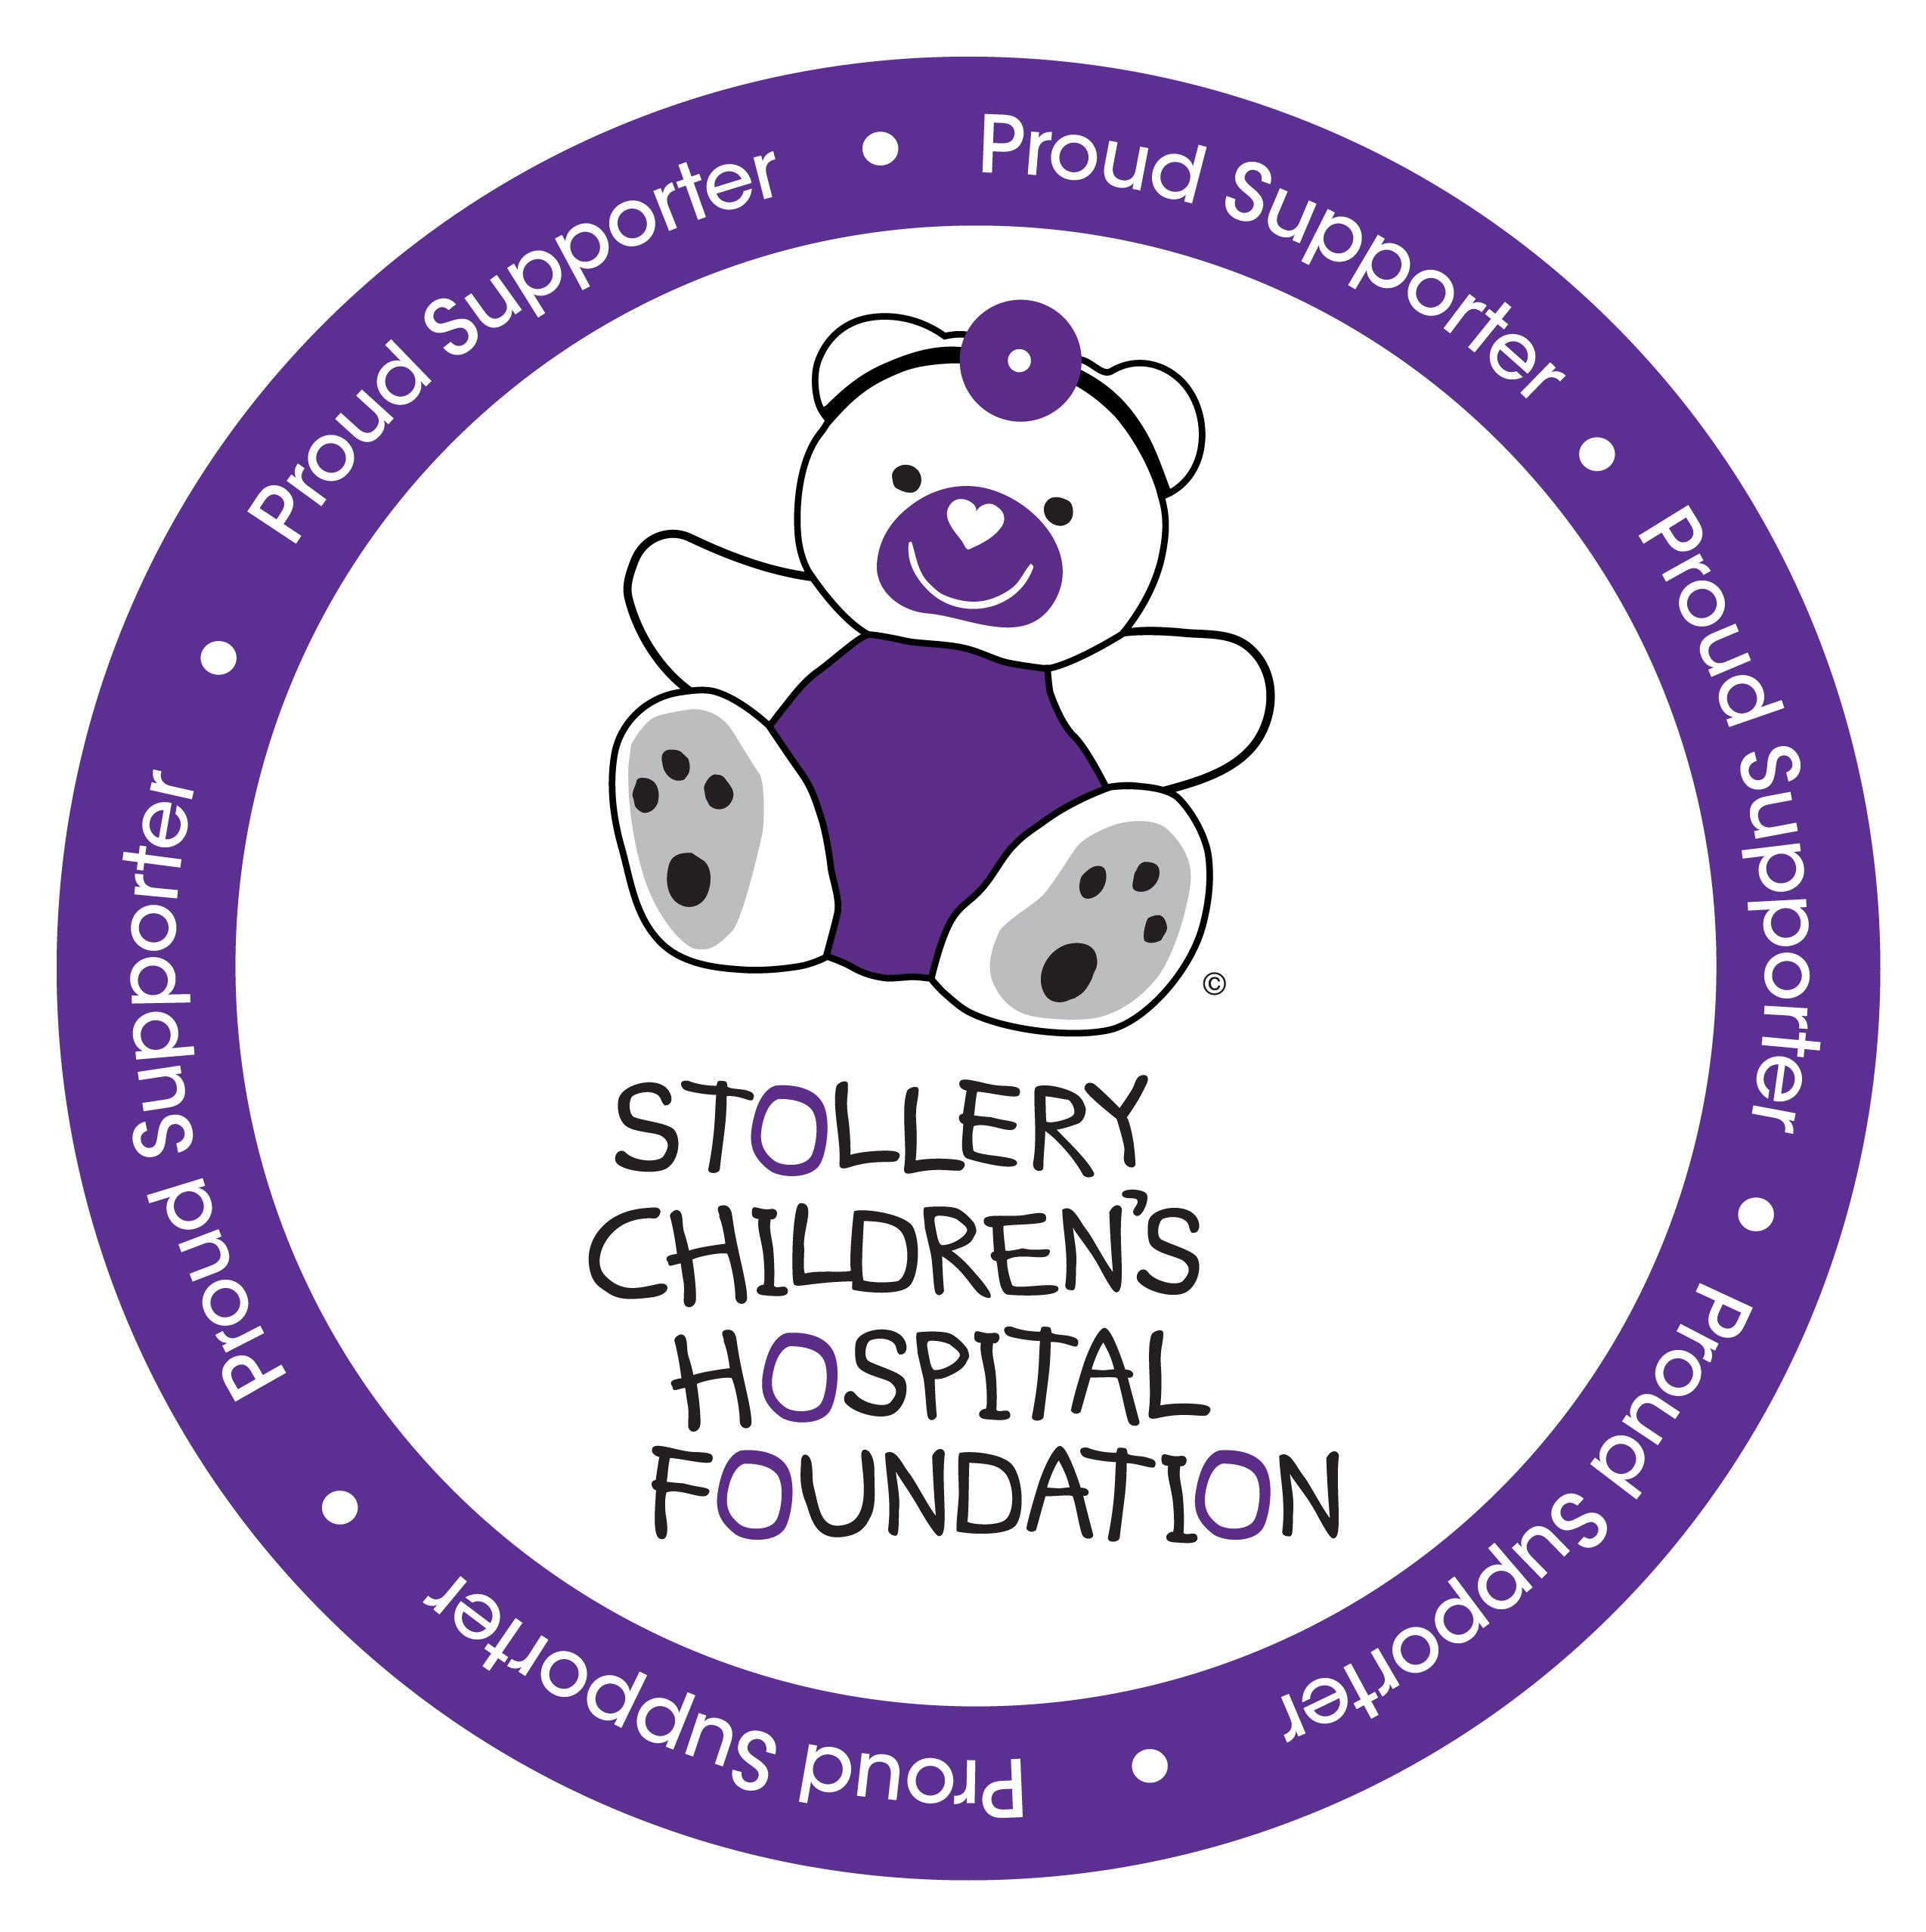 Donate now to the Stollery Children's Hospital Foundation